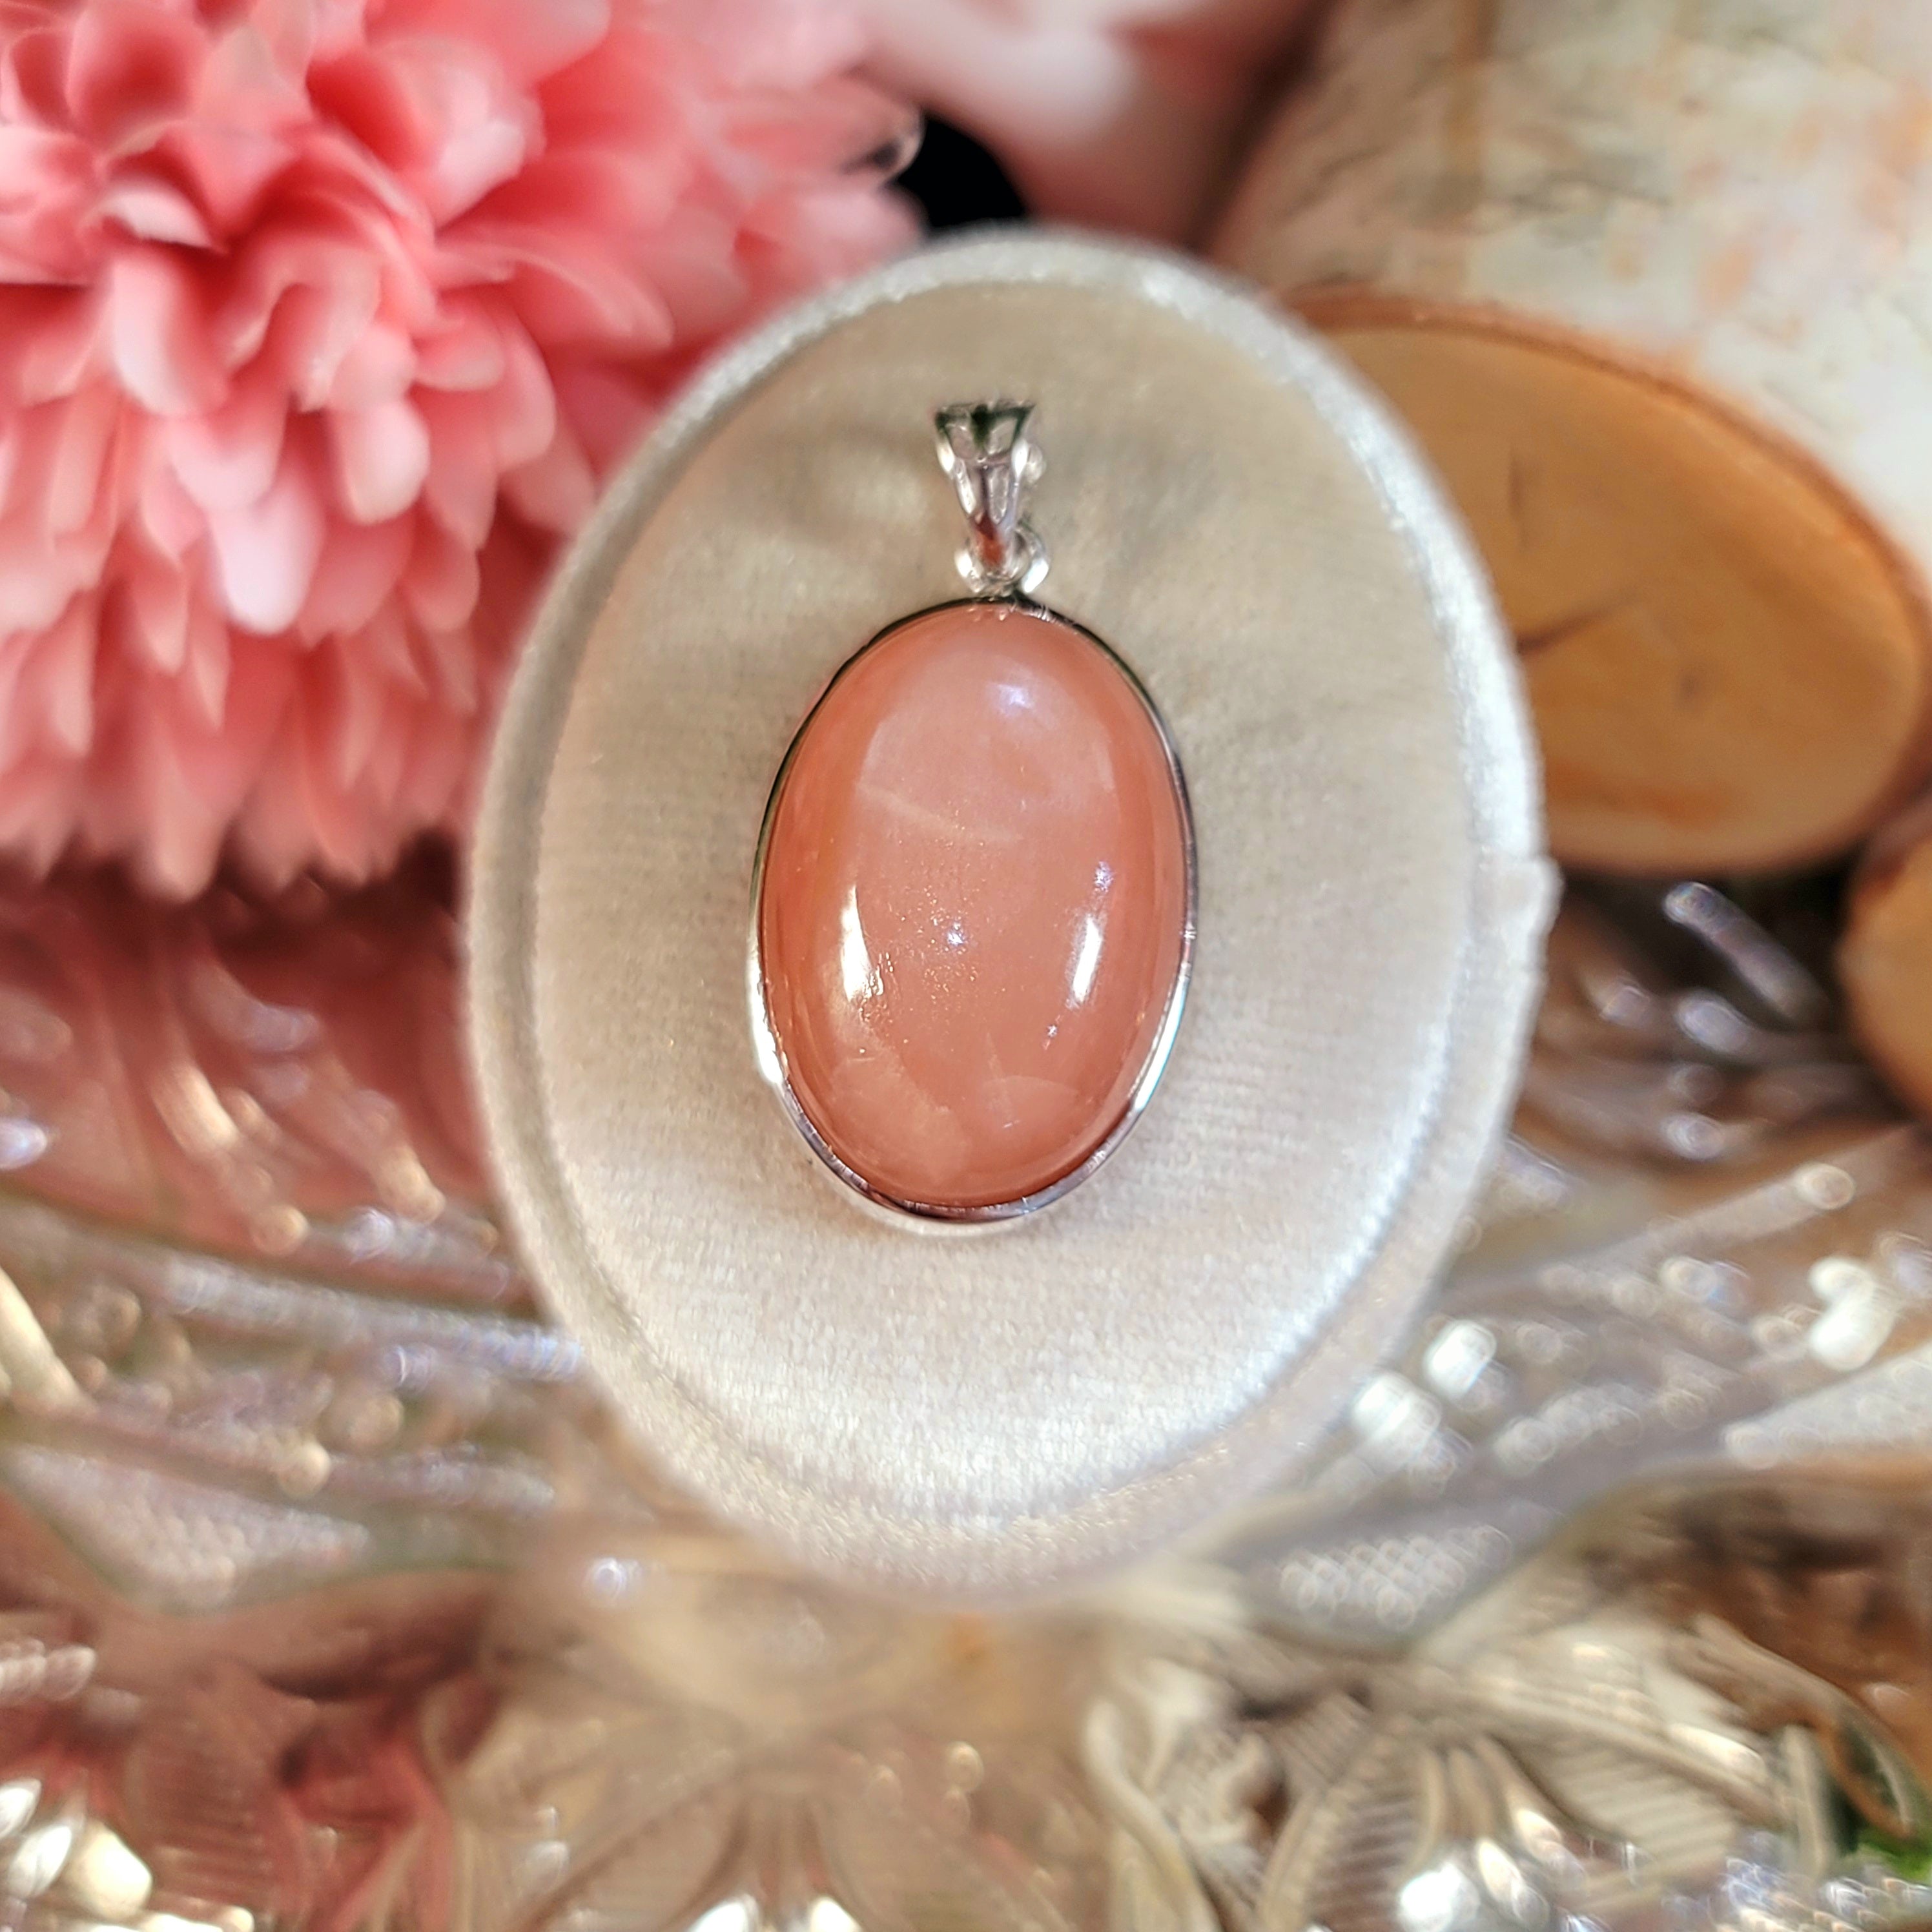 Peach Moonstone Pendant .925 Sterling Silver for Creative Flow, Manifesting and Expression